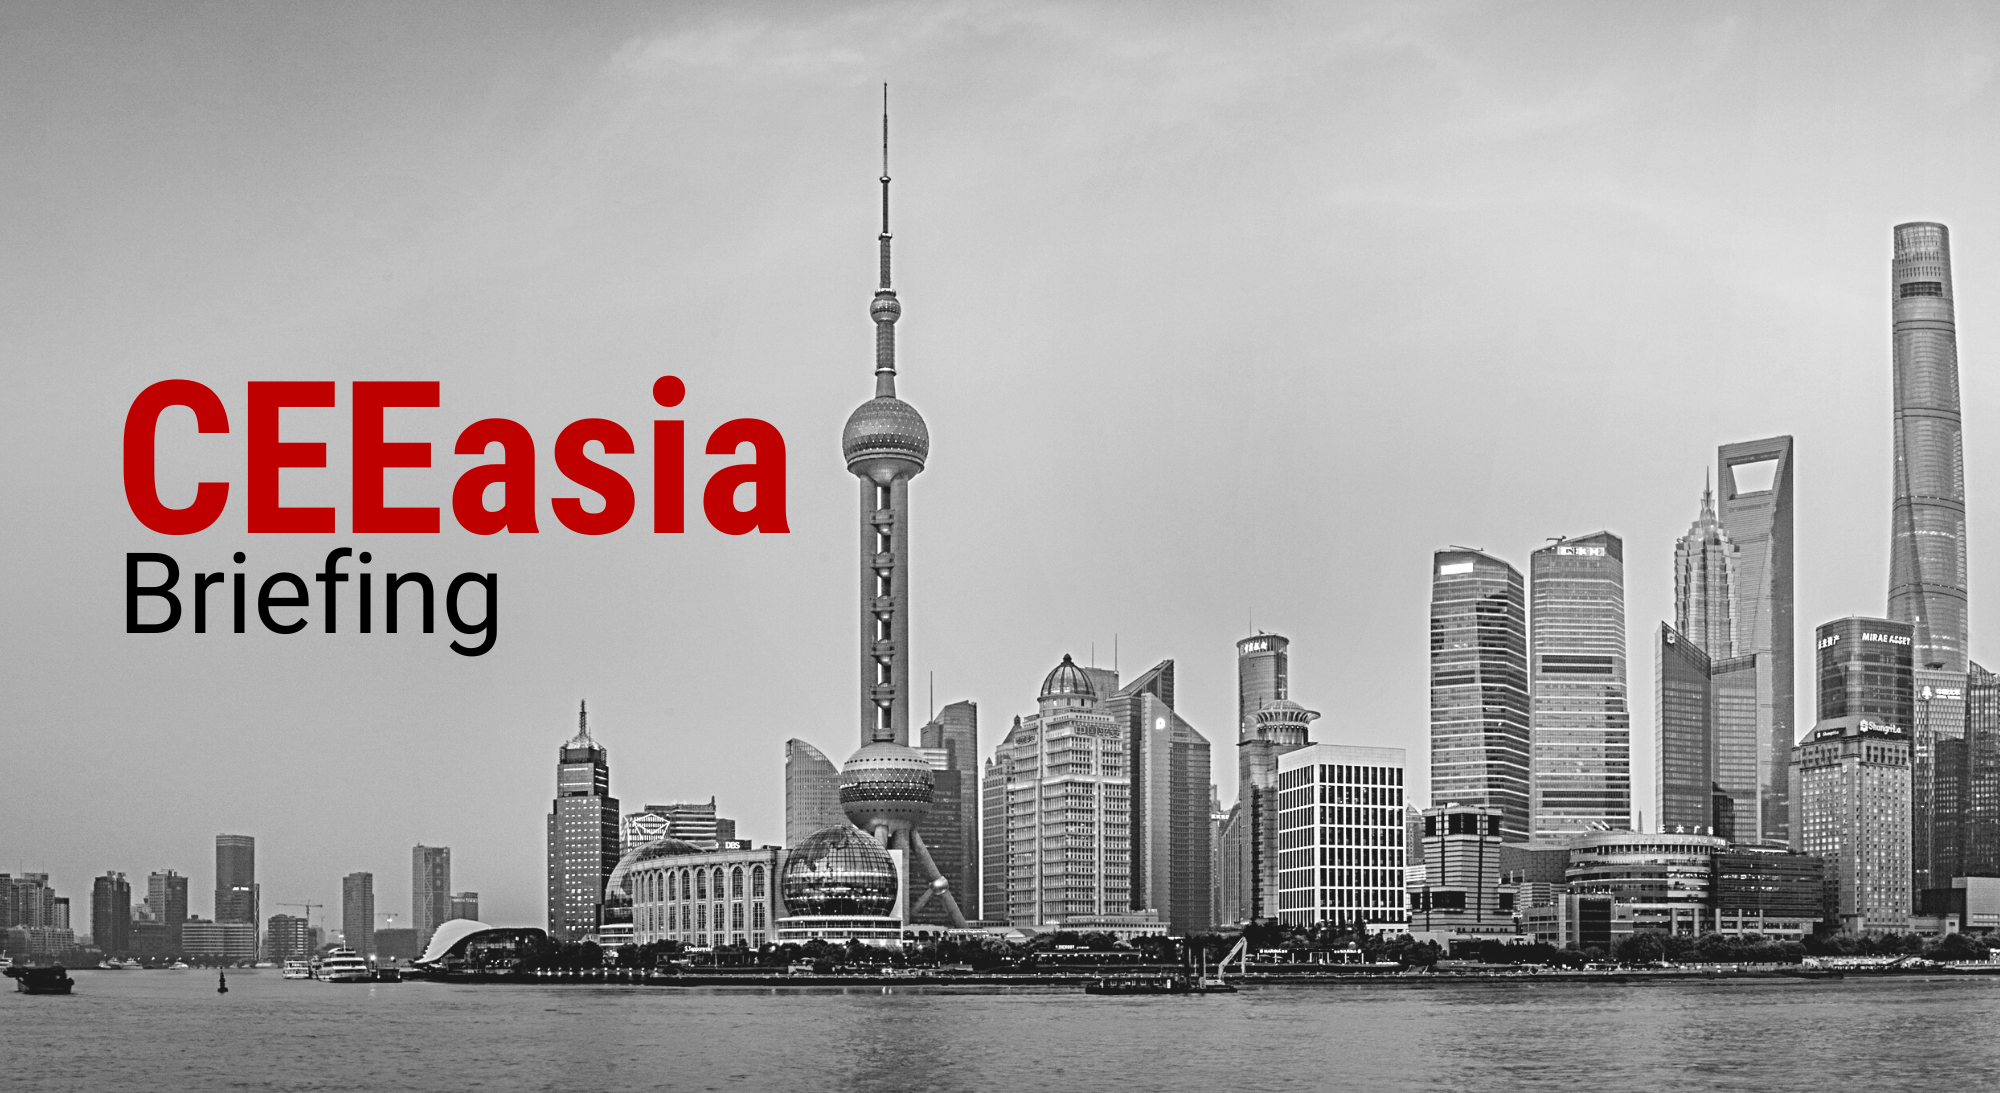 CEEasia Briefing #21: Fudan University in Hungary, Taiwan & CEE countries, Sinopharm vaccine in Serbia, South Korea defense cooperation with Poland